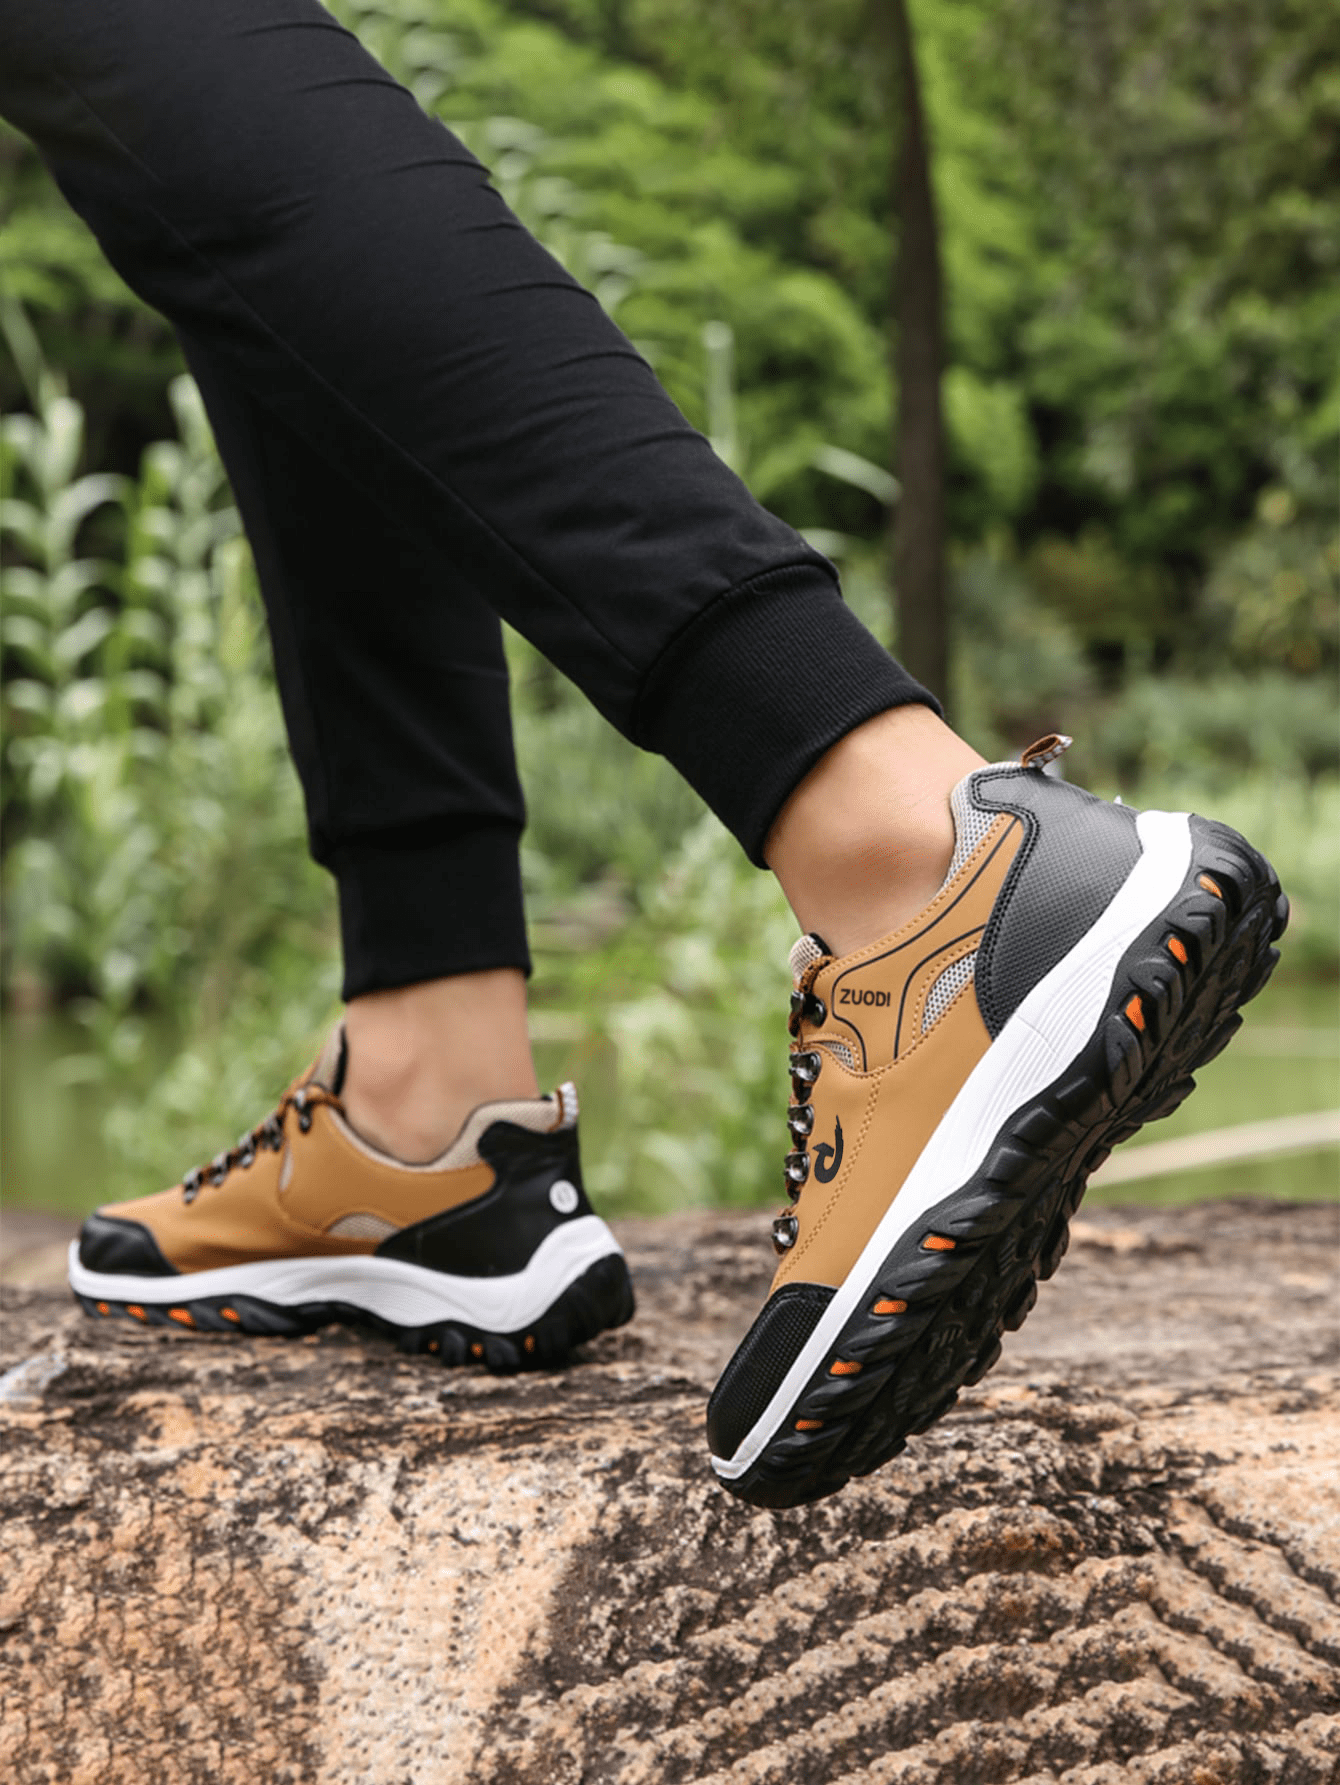 New Arrival, Fall/Winter Sports Shoes, Large Size, Waterproof & Slip-Resistant, Outdoor Walking, Casual, Light Weight And Hiking Shoes